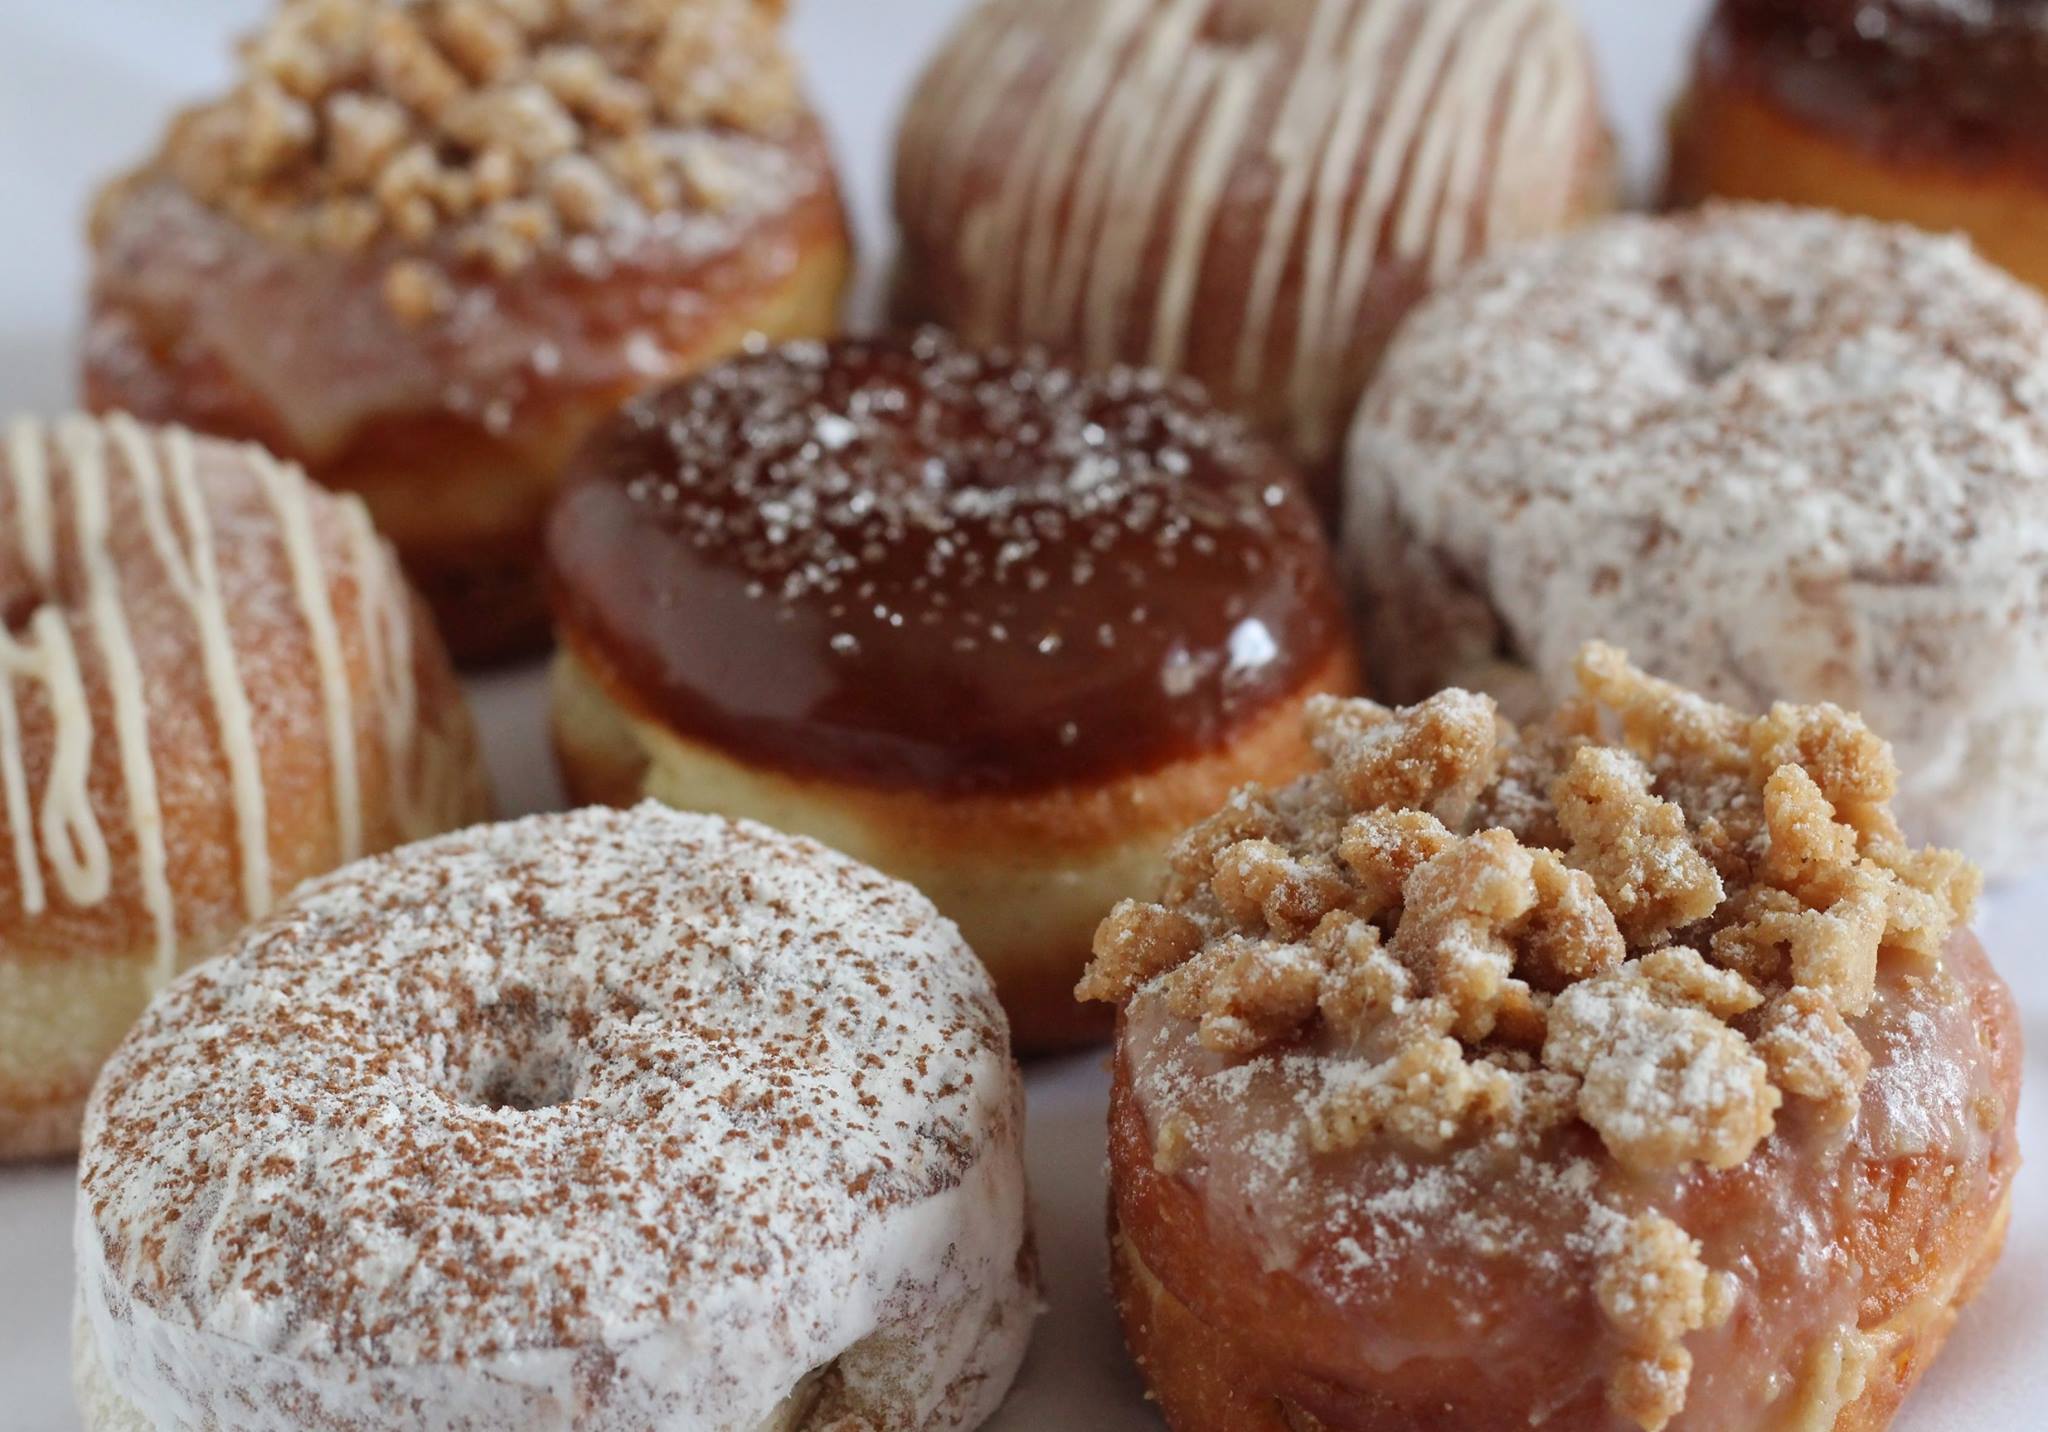 Area freebies and offers for National Doughnut Day